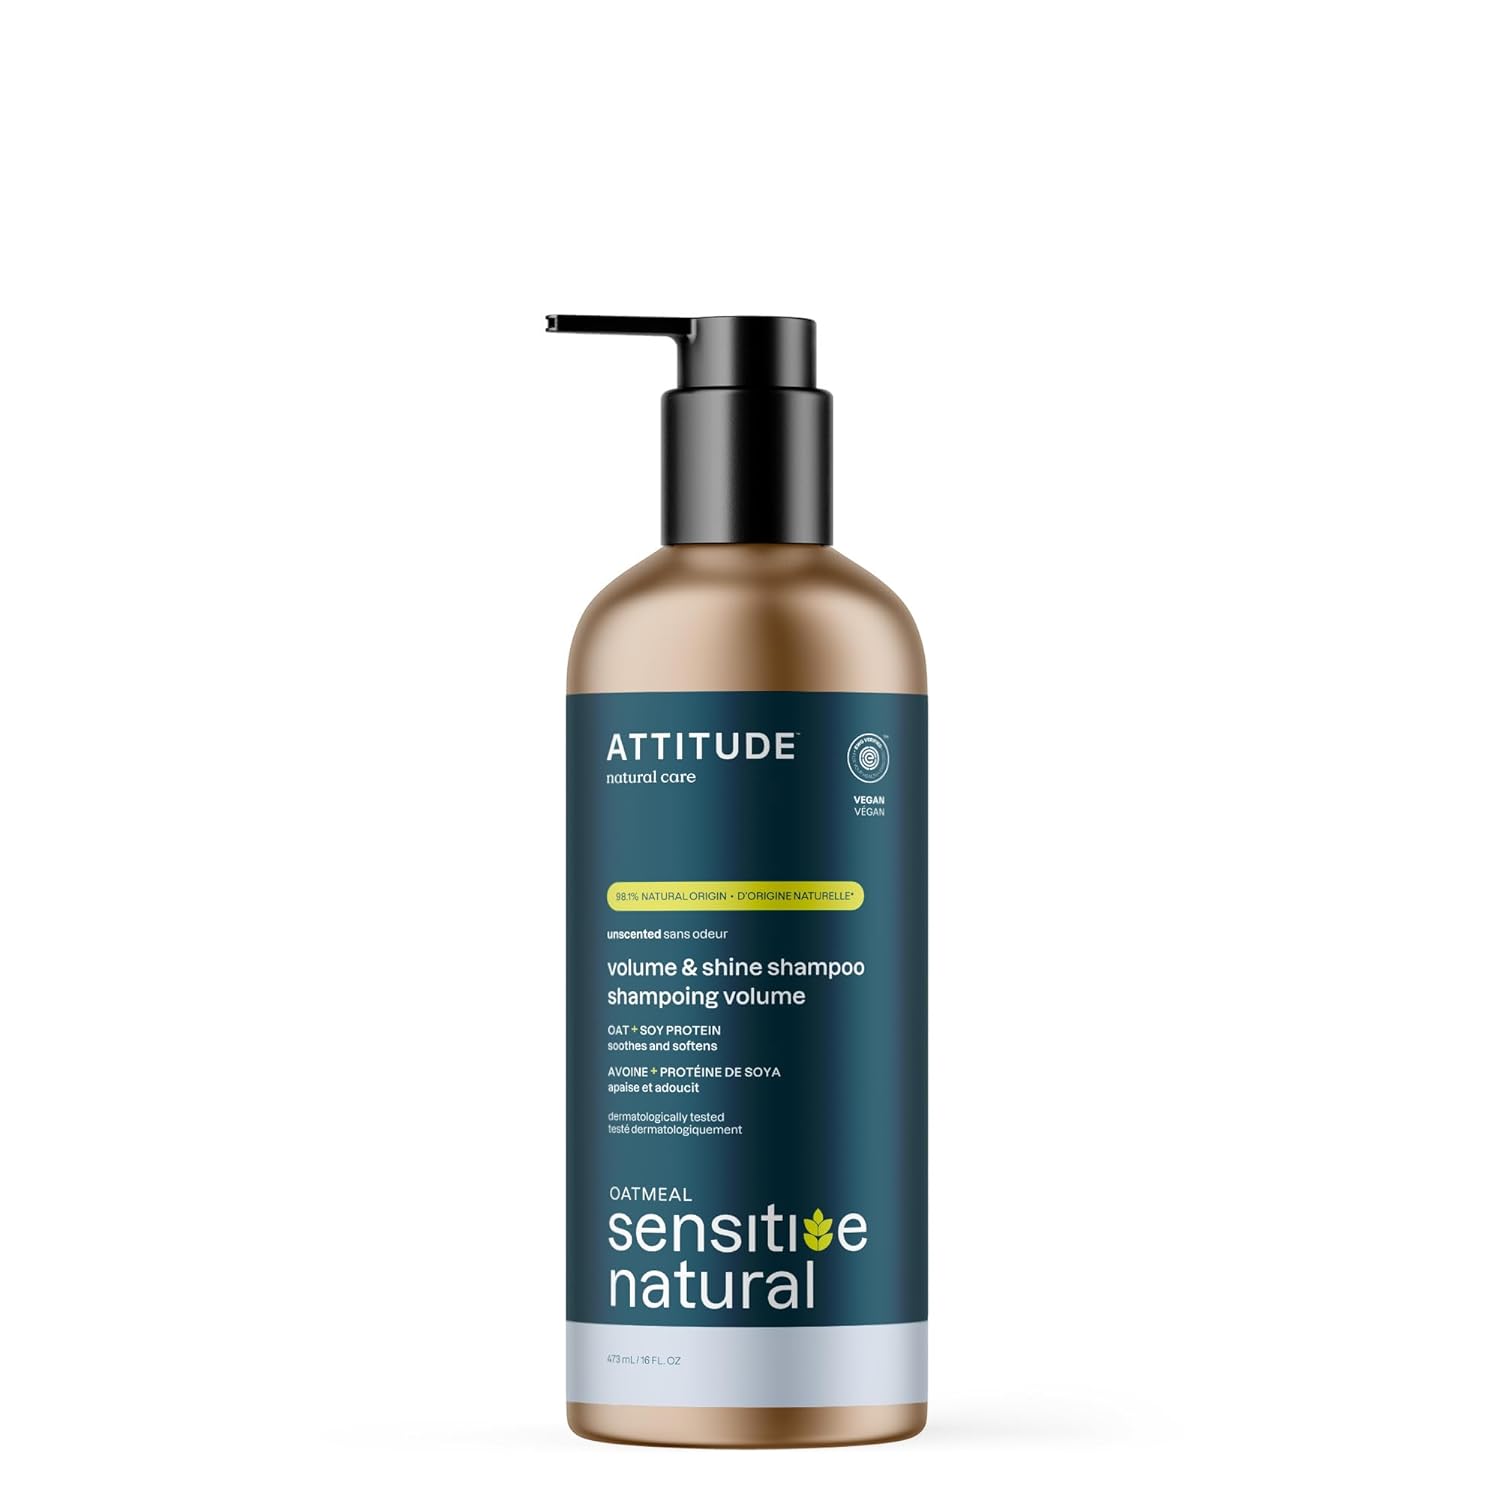 ATTITUDE Volume and Shine Hair Shampoo for Sensitive Dry Scalp, EWG Verified, Soothing Oat, Thin Hair, Naturally Dervied Ingredients, Vegan Plant-Based, Unscented, Refillable Aluminum Bottle, 16 Fl Oz